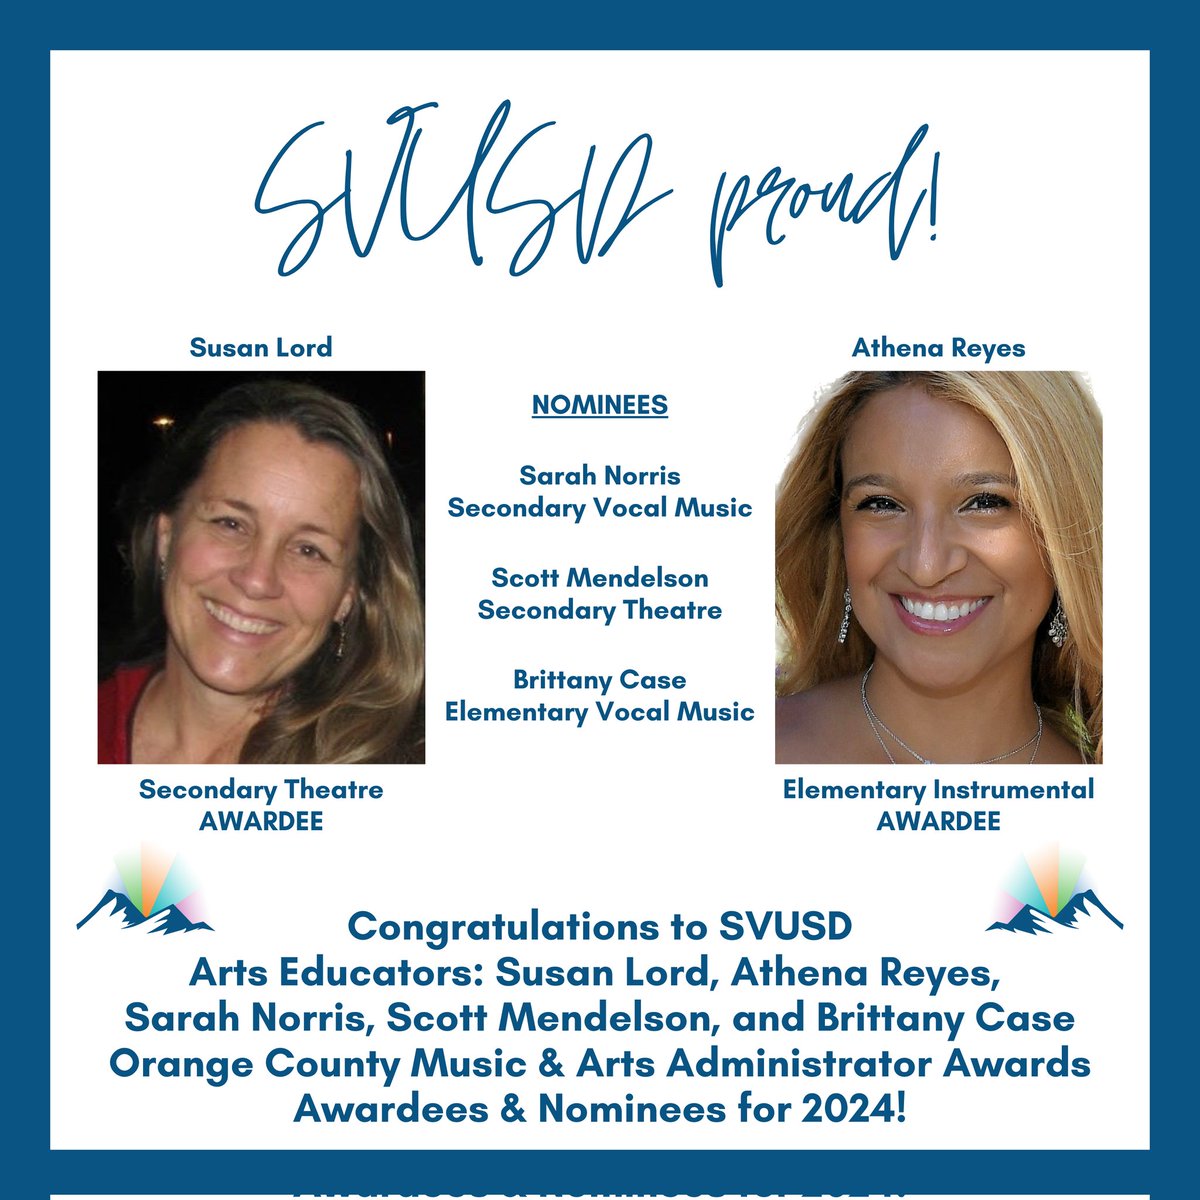 Help us congratulate five of our incredible SVUSD VAPA educators on their 2024 Orange County Music & Arts Administrators Awards nominations & distinctions! We will honor them Tuesday, February 27th in the Samueli Theatre at @SegerstromArts! @SVUSDSchools @Arts4Oc